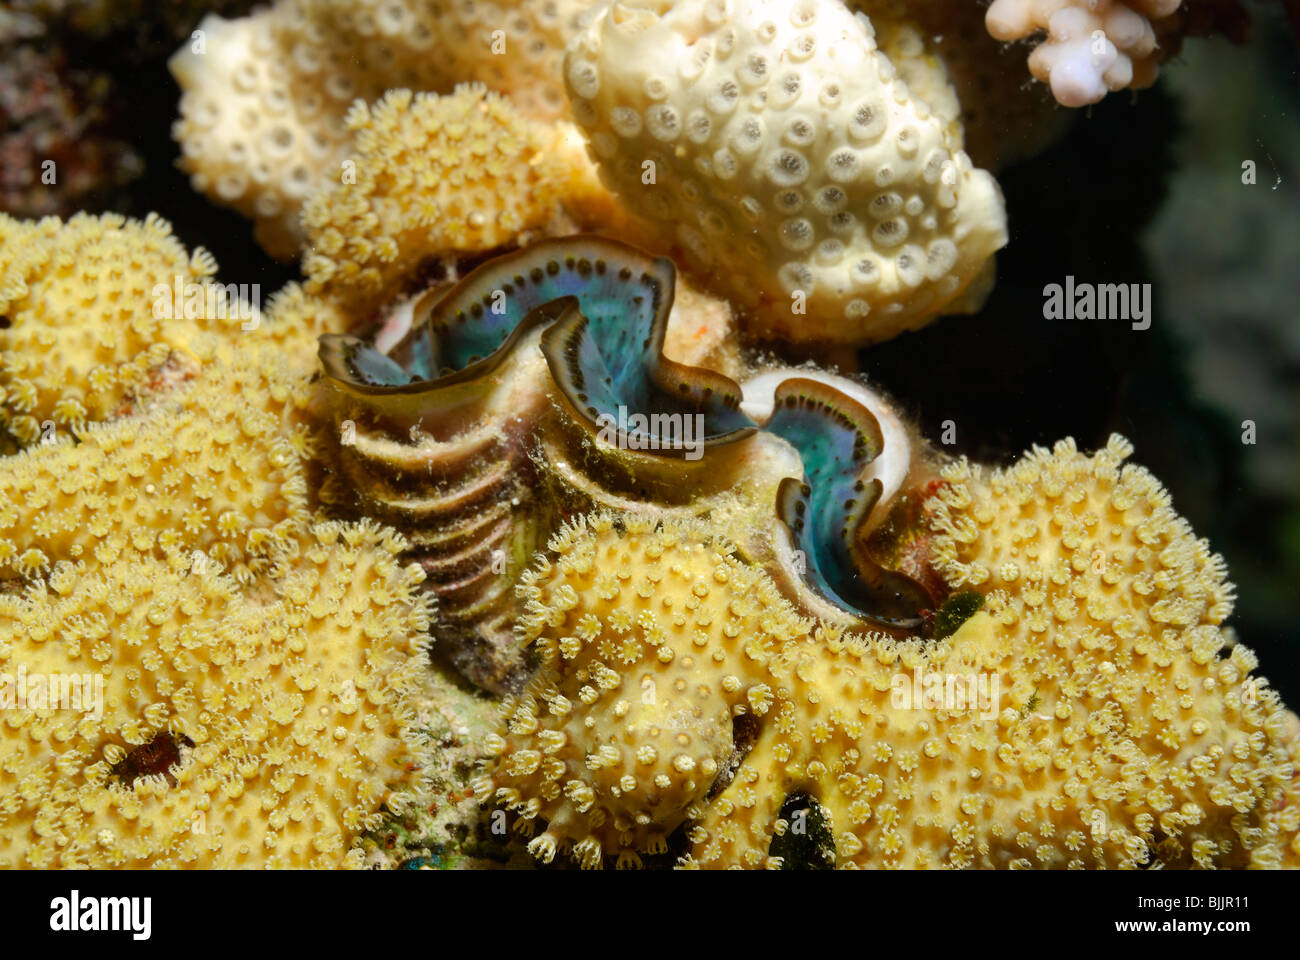 Giant clam in the Red Sea, off Hurghada, Egypt. Stock Photo